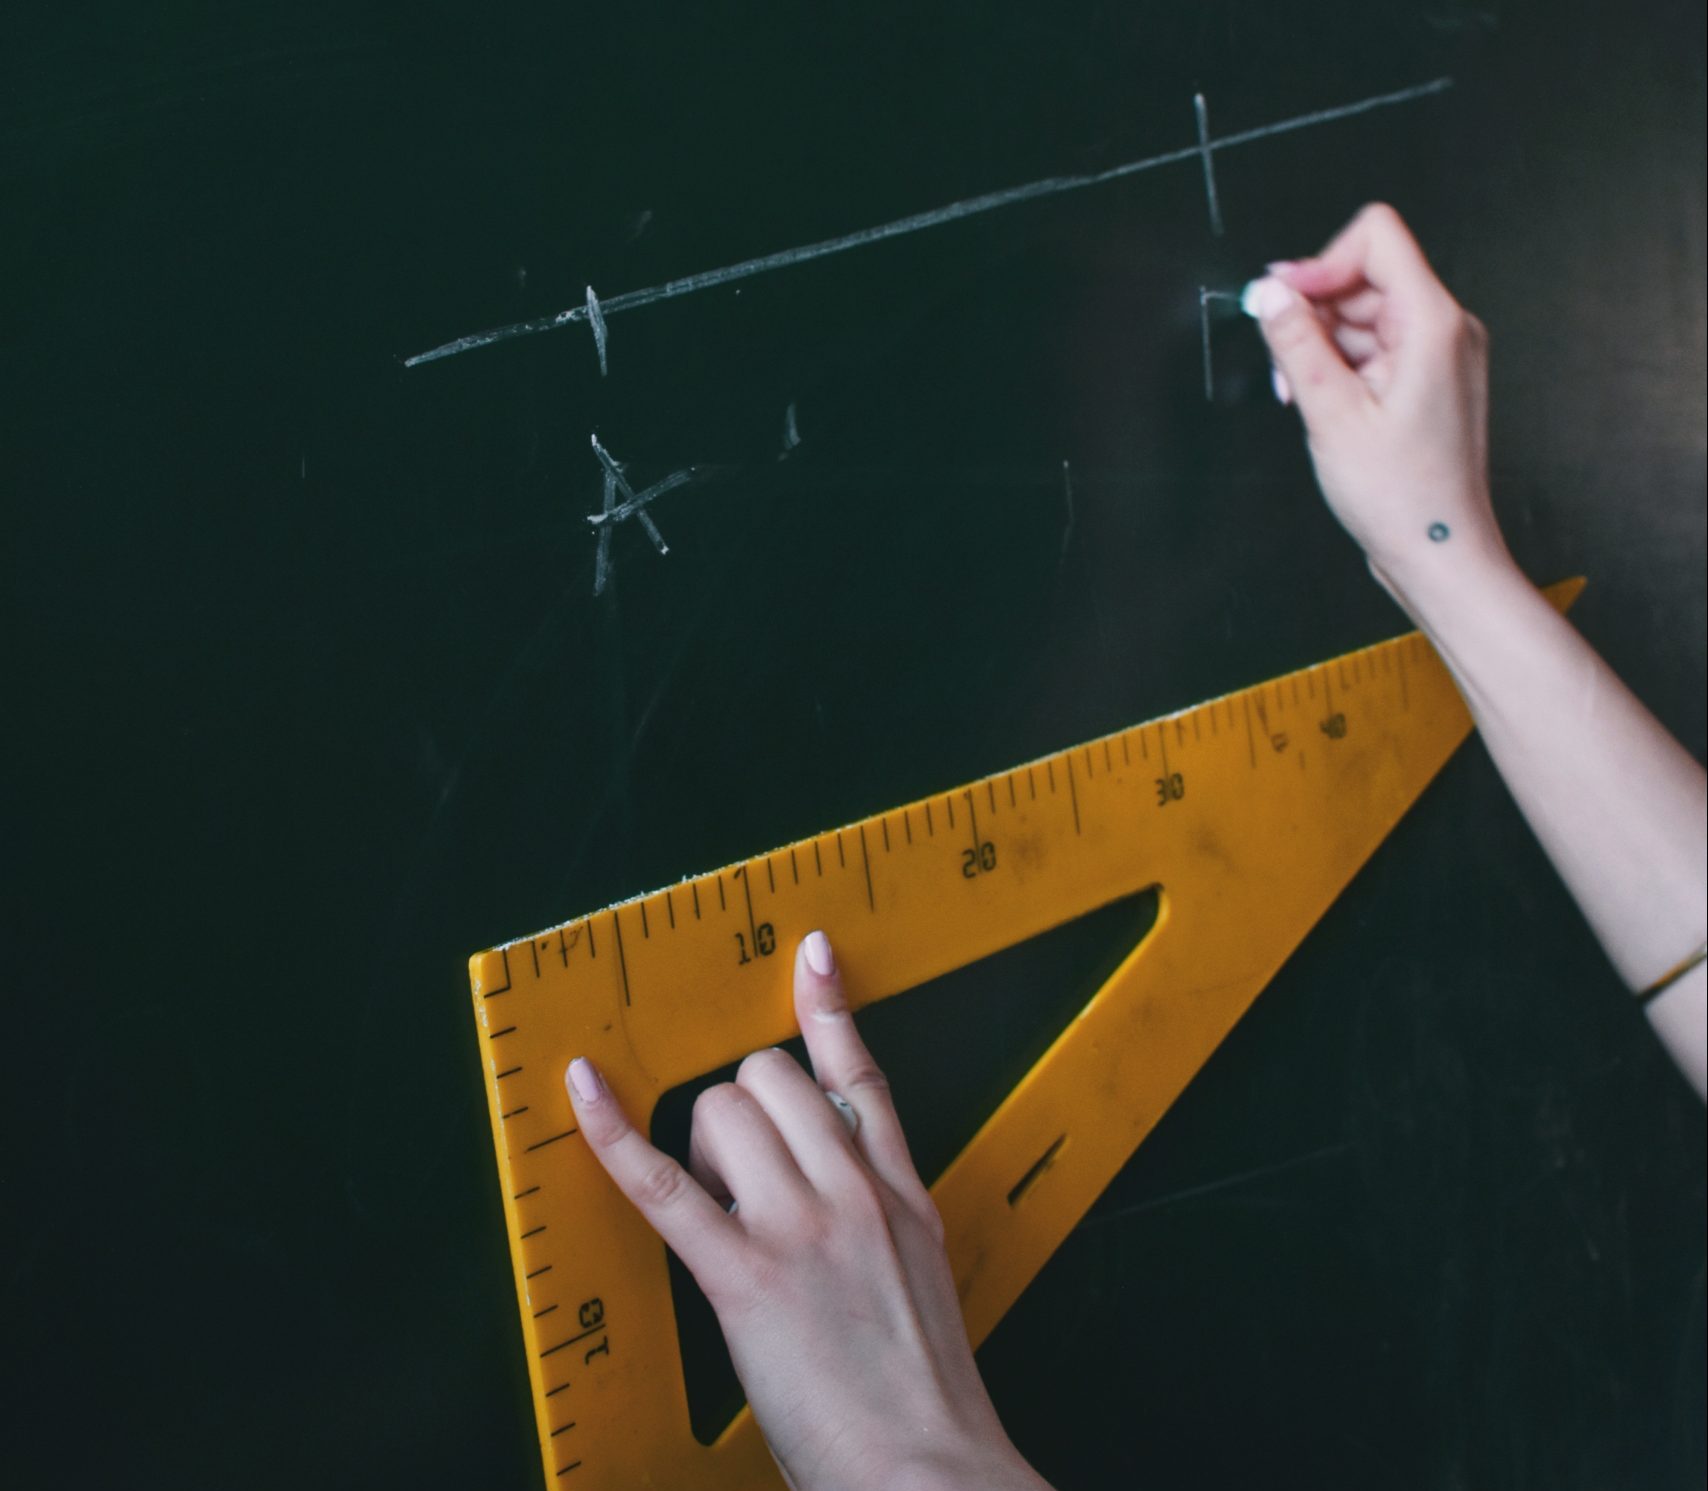 person measuring distance on a chalk board with chalk